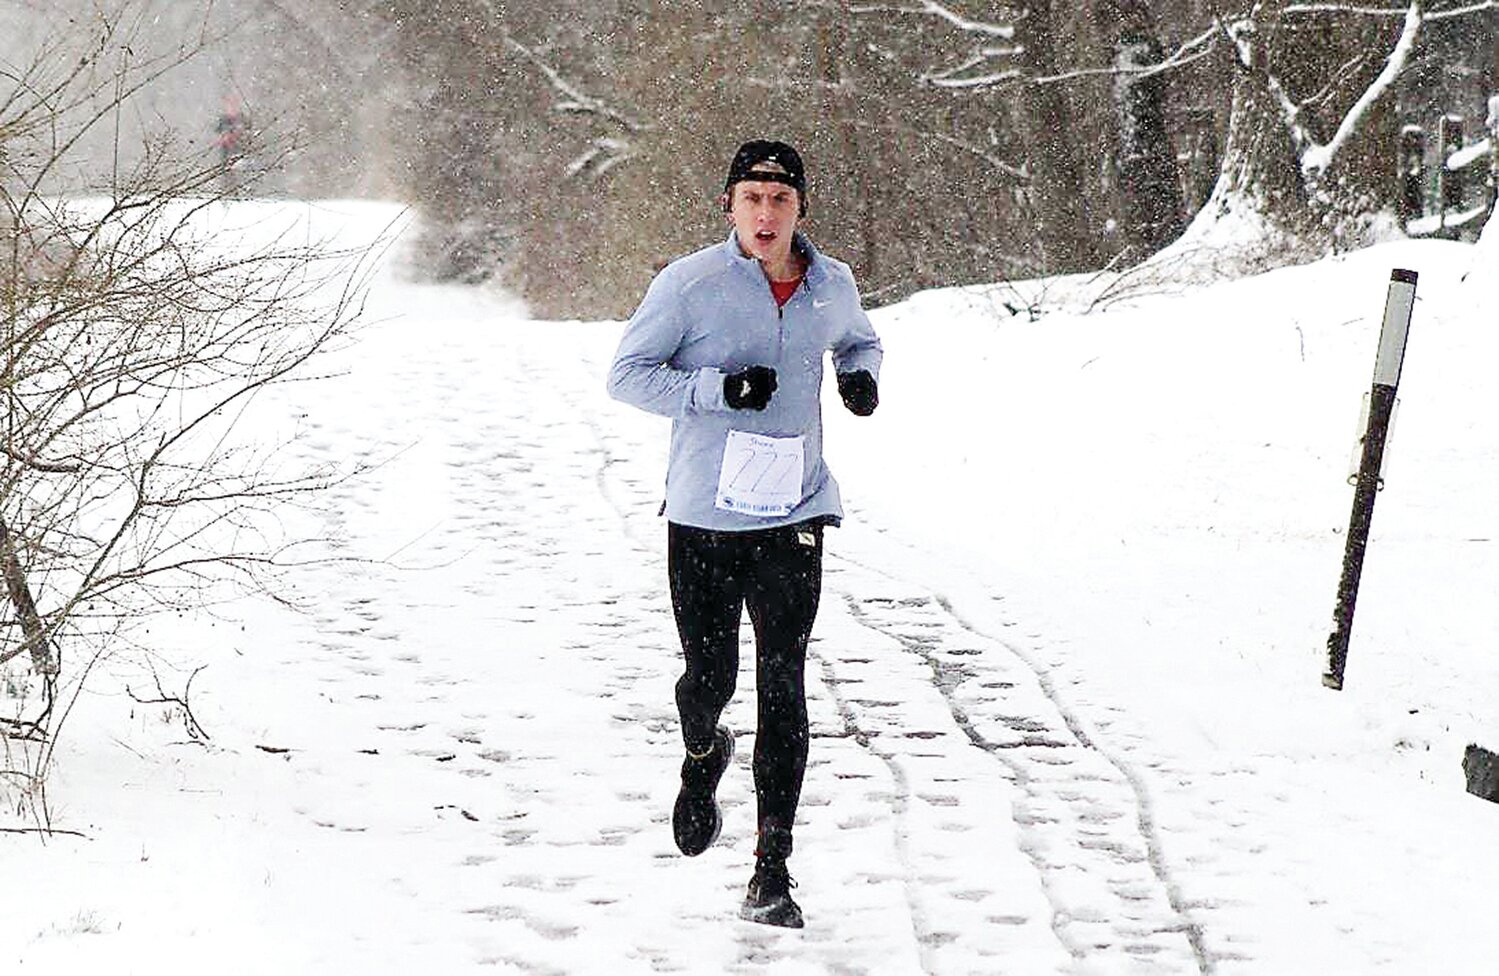 Jamie Gray runs in a Bucks County Roadrunners Club’s Winter Series race at Tyler State Park.